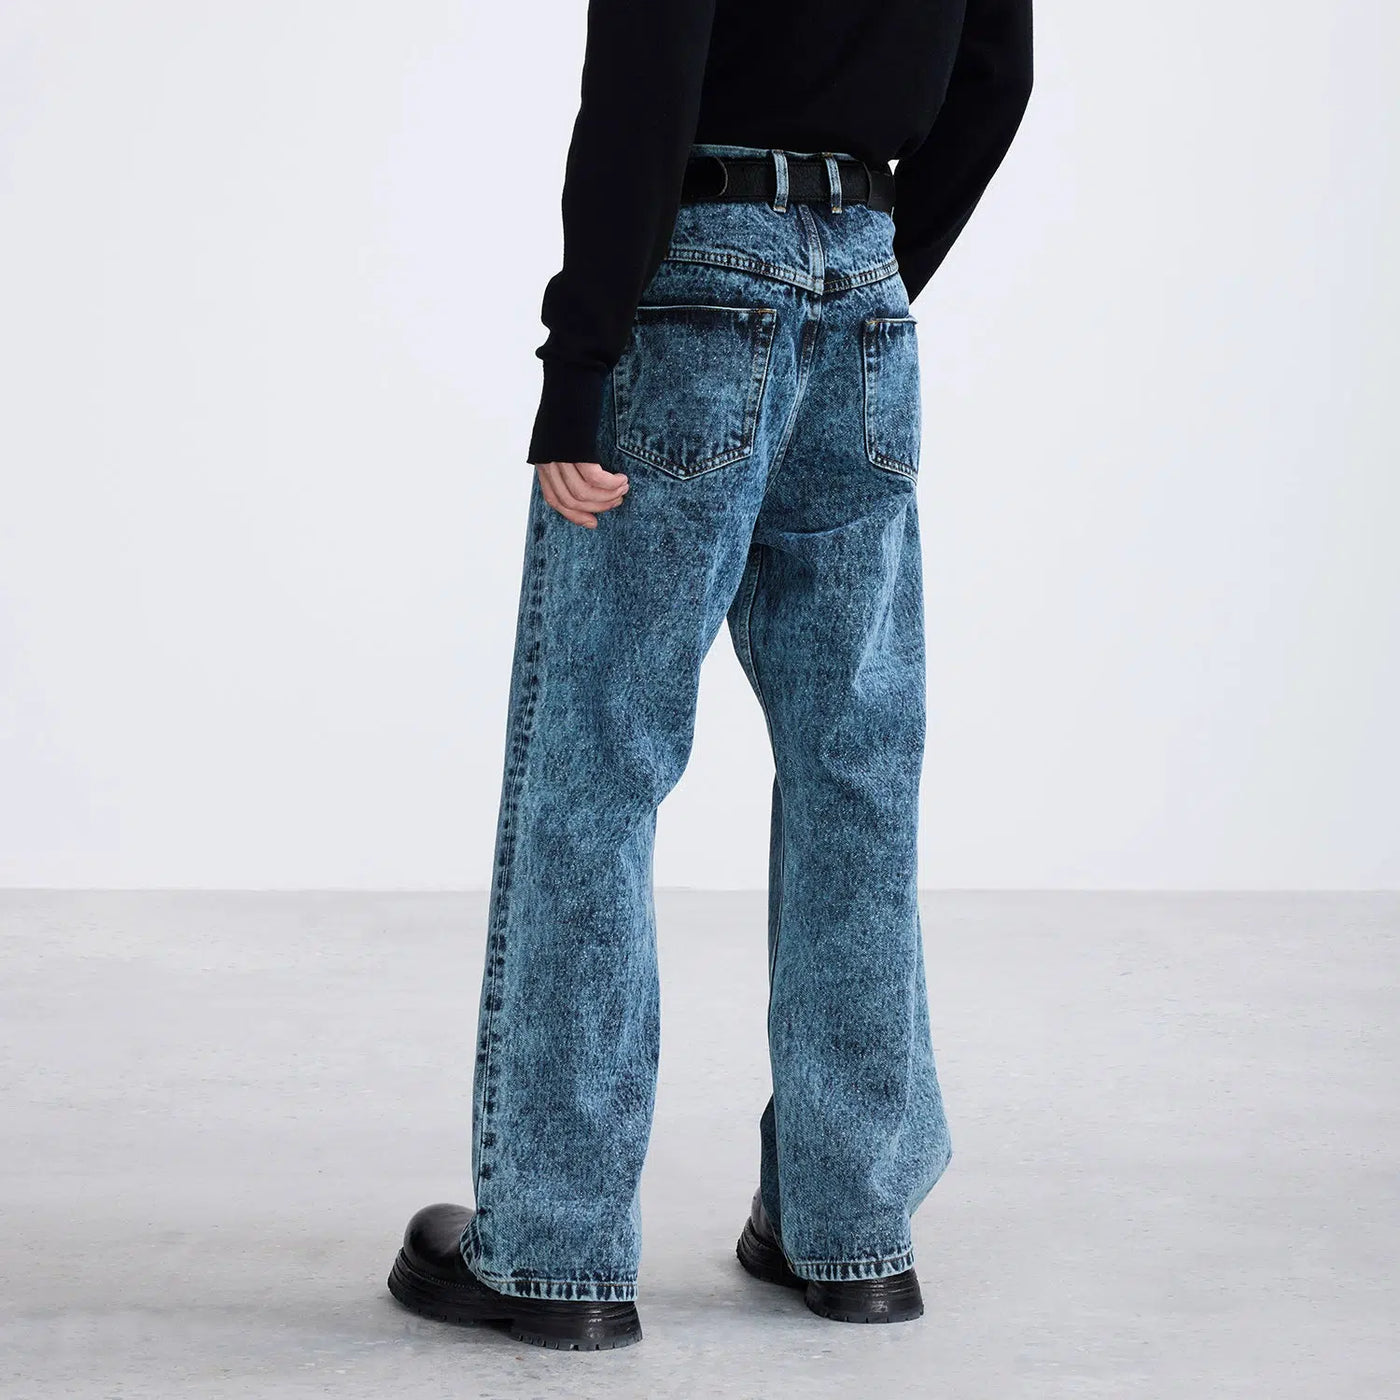 Essential Washed Bootcut Jeans Korean Street Fashion Jeans By Terra Incognita Shop Online at OH Vault